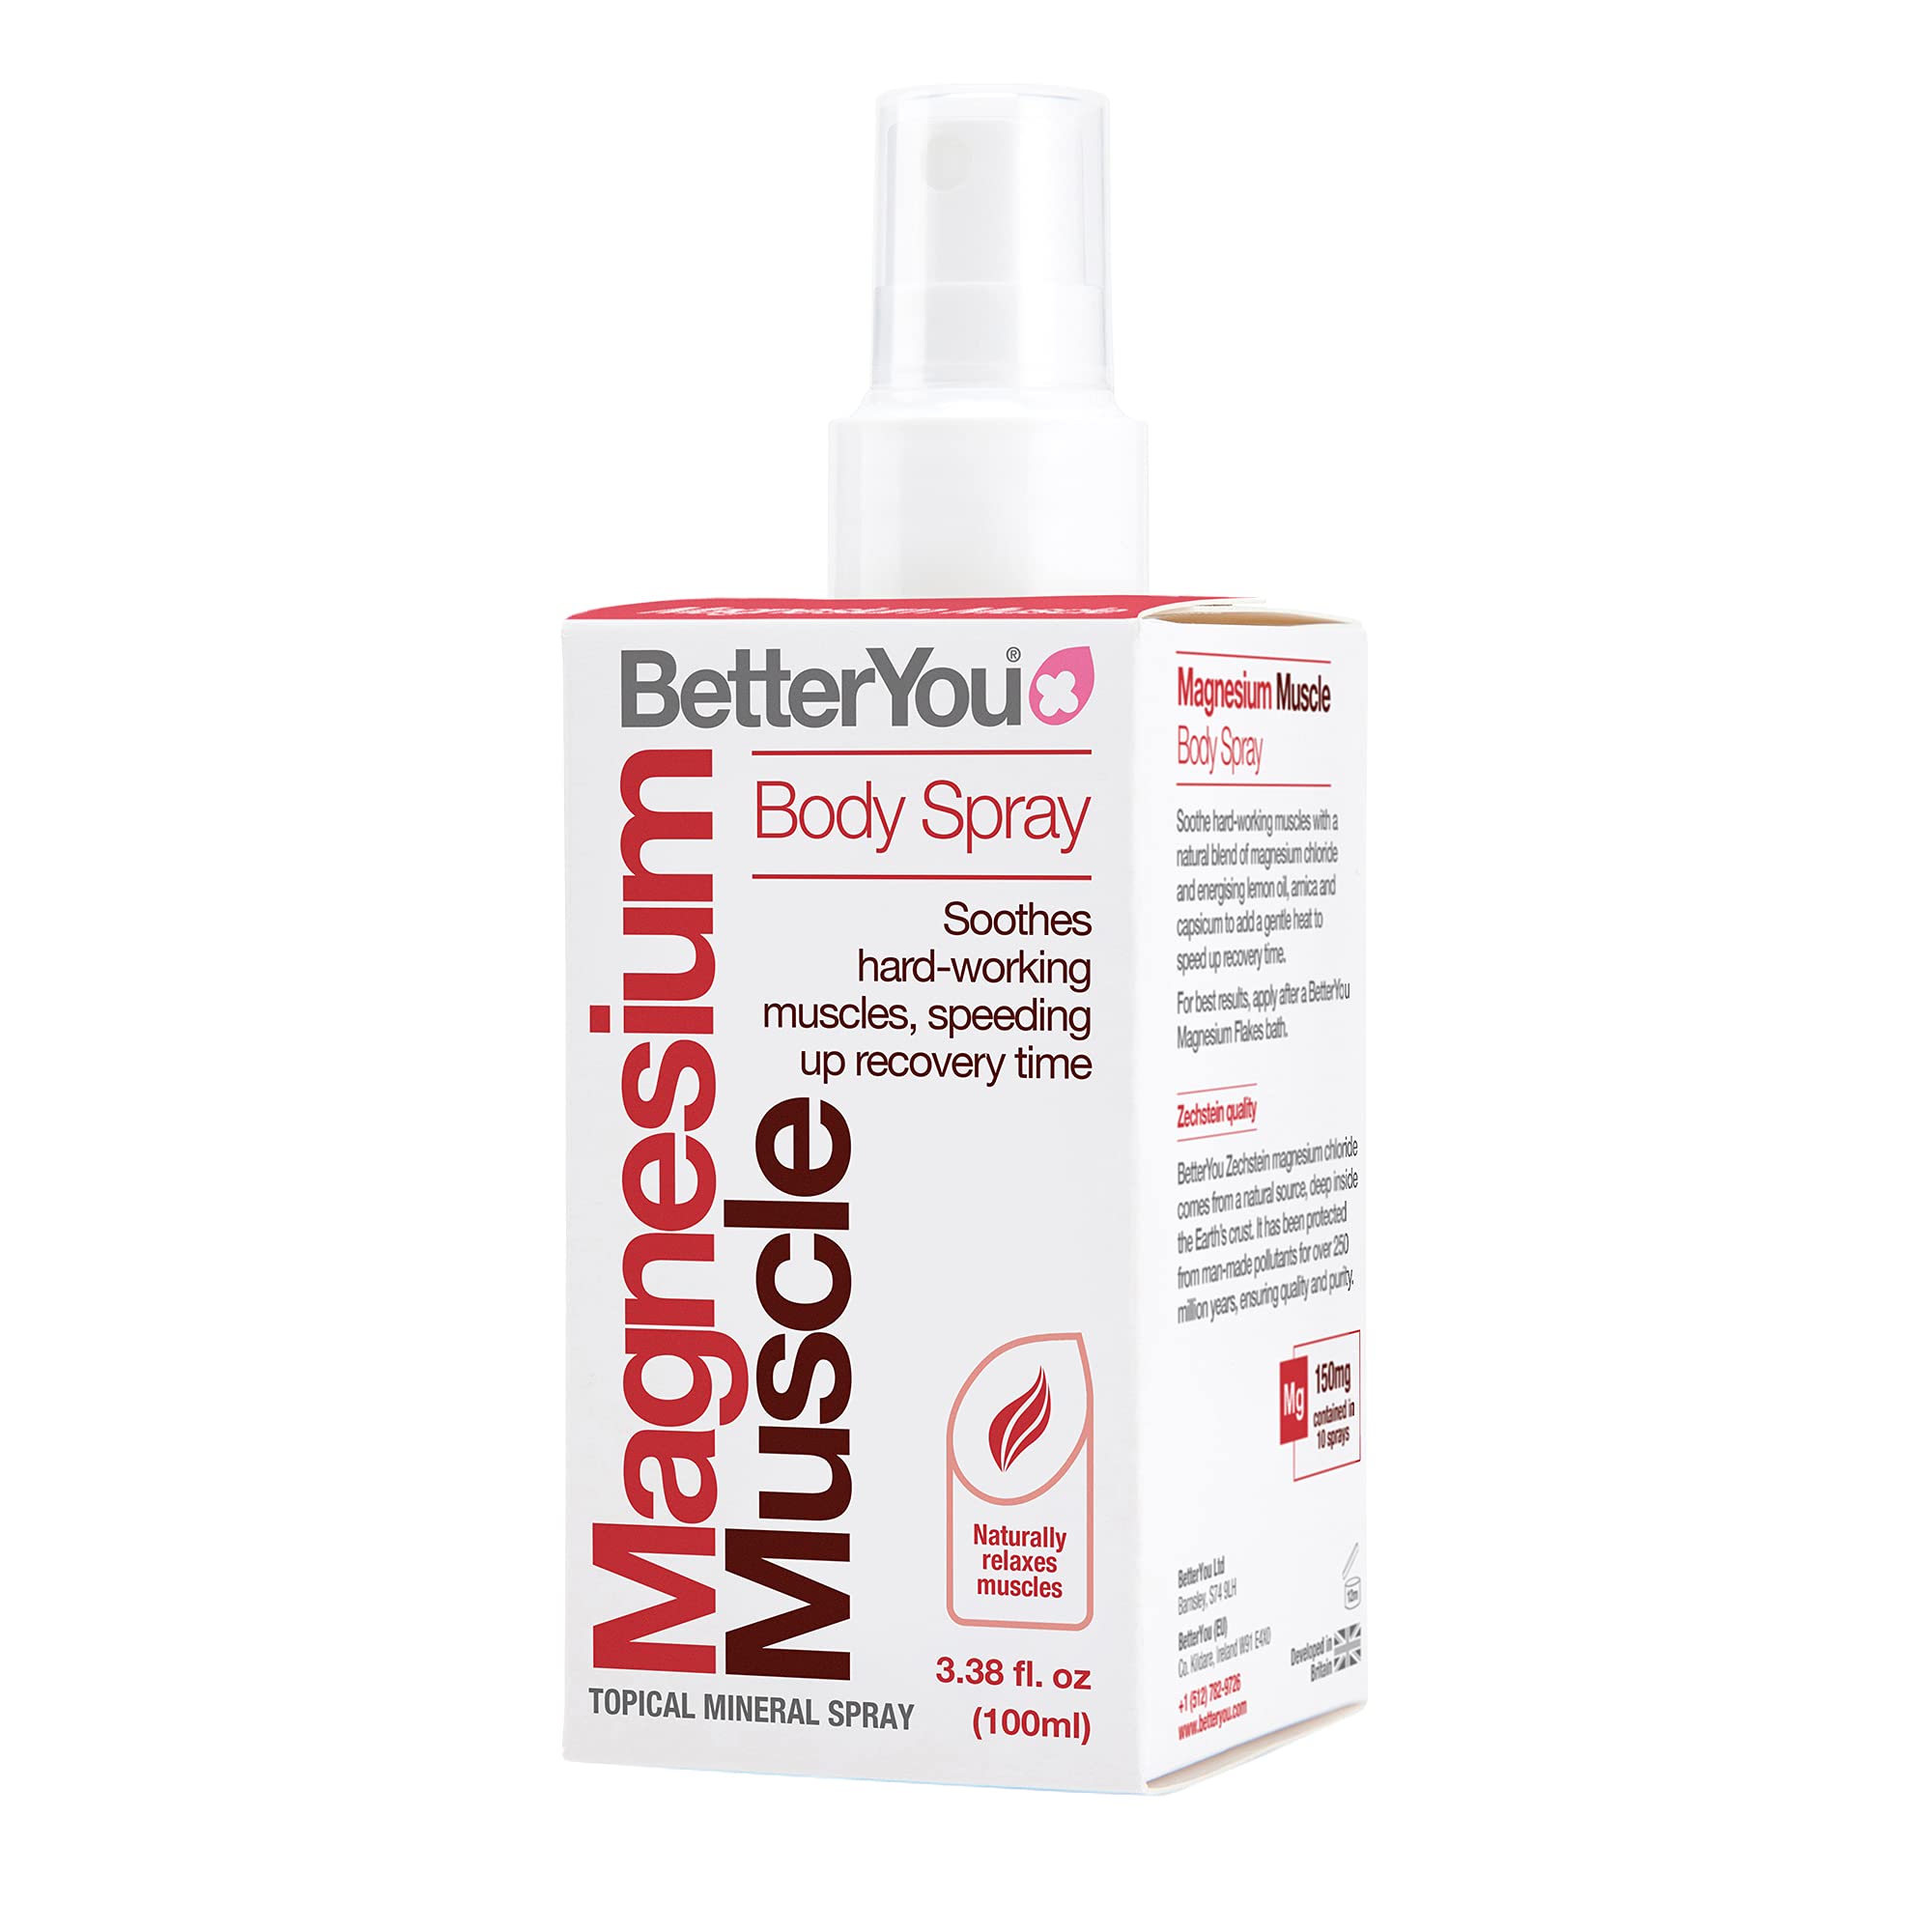 BetterYou Magnesium Muscle Body Spray | Pure, Clean and Natural Source of Magnesium Chloride | Helps Reduce Recovery Time and Soothes Hard-working Muscles | 100ml (600 Sprays)